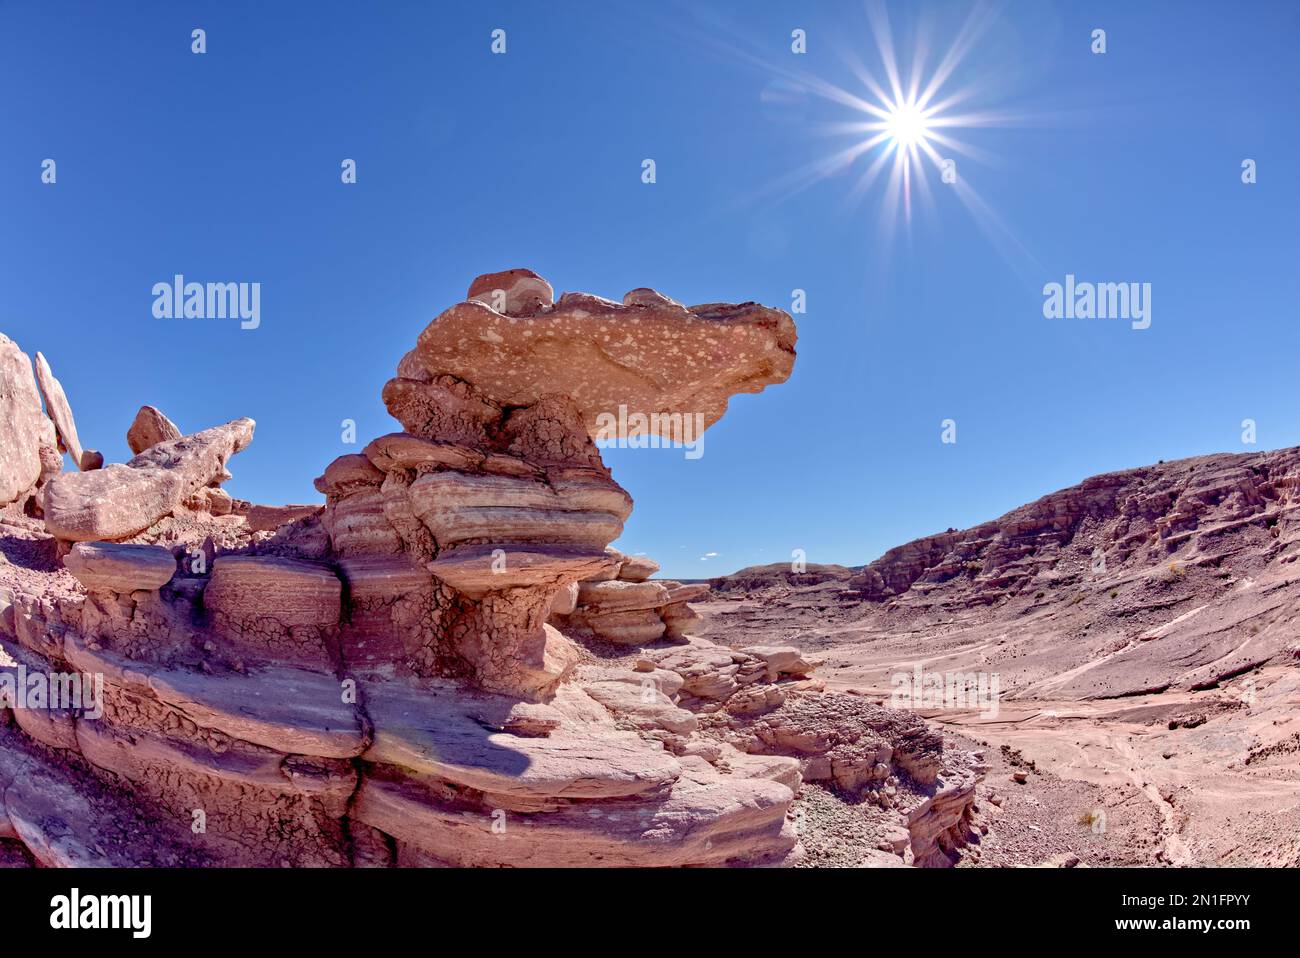 A hoodoo in Angels Garden at Petrified Forest, shaped like a dragon's head, Arizona, United States of America, North America Stock Photo